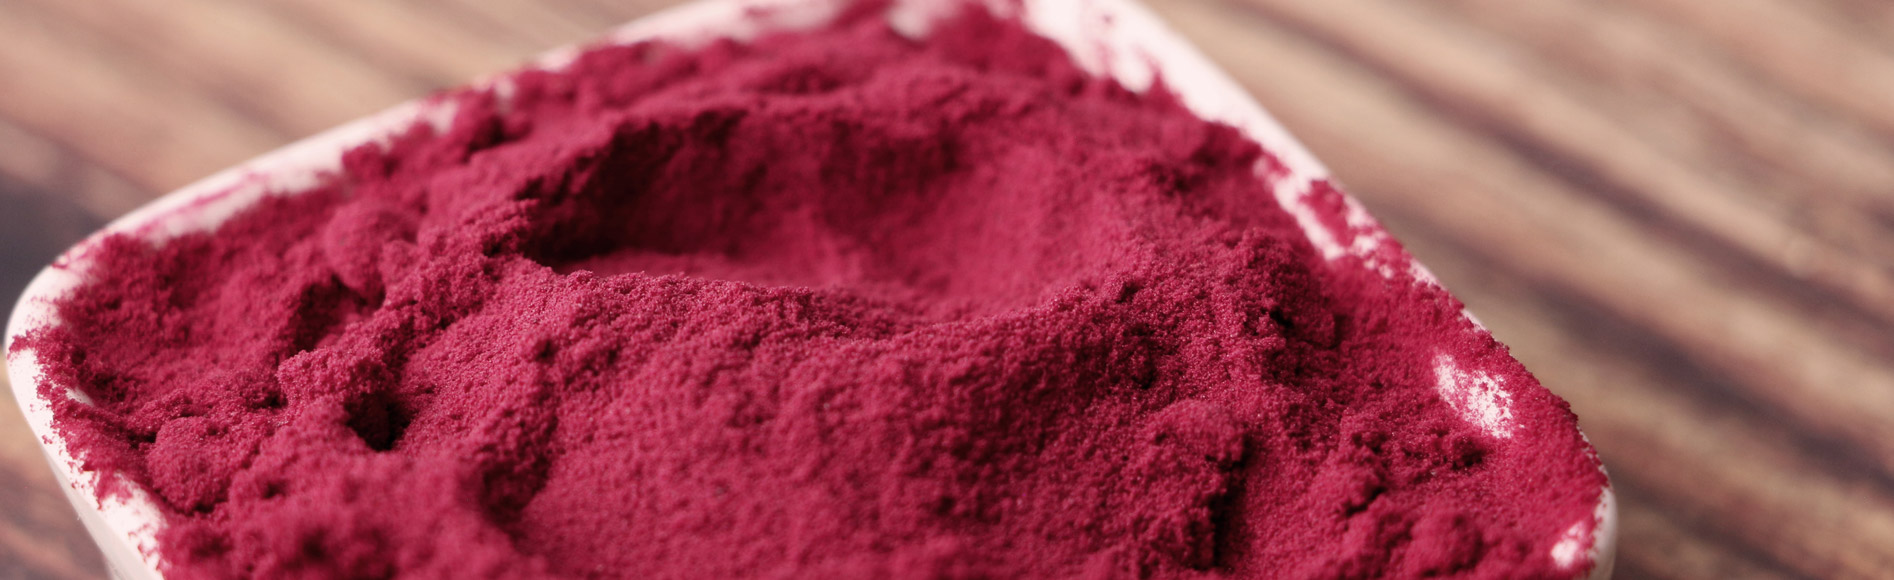 Instant Beet Powder Beautiful color product powder